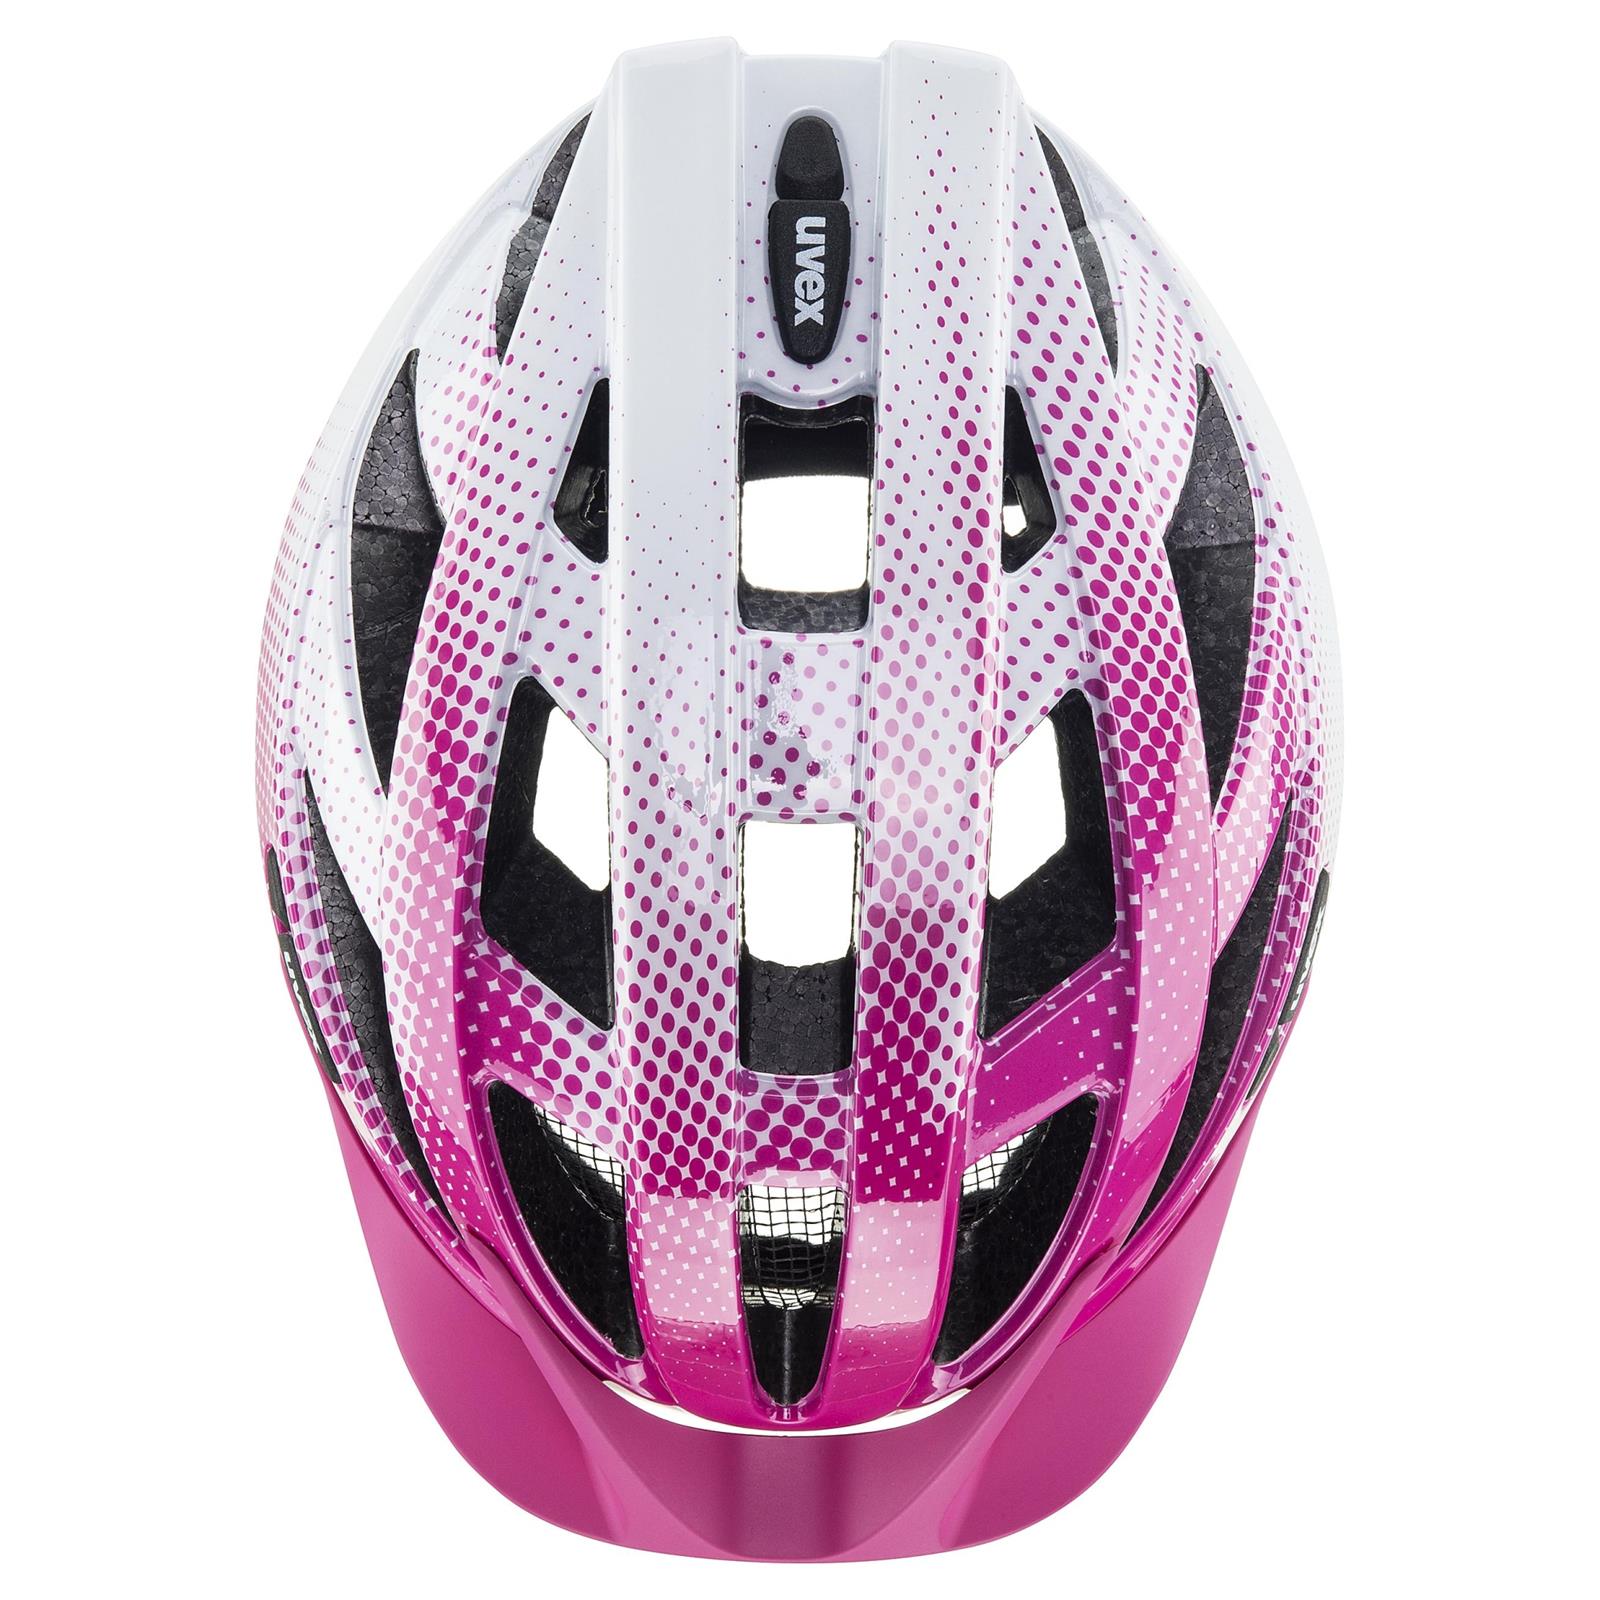 UVEX Air Wing Pink - White (s4144262700)